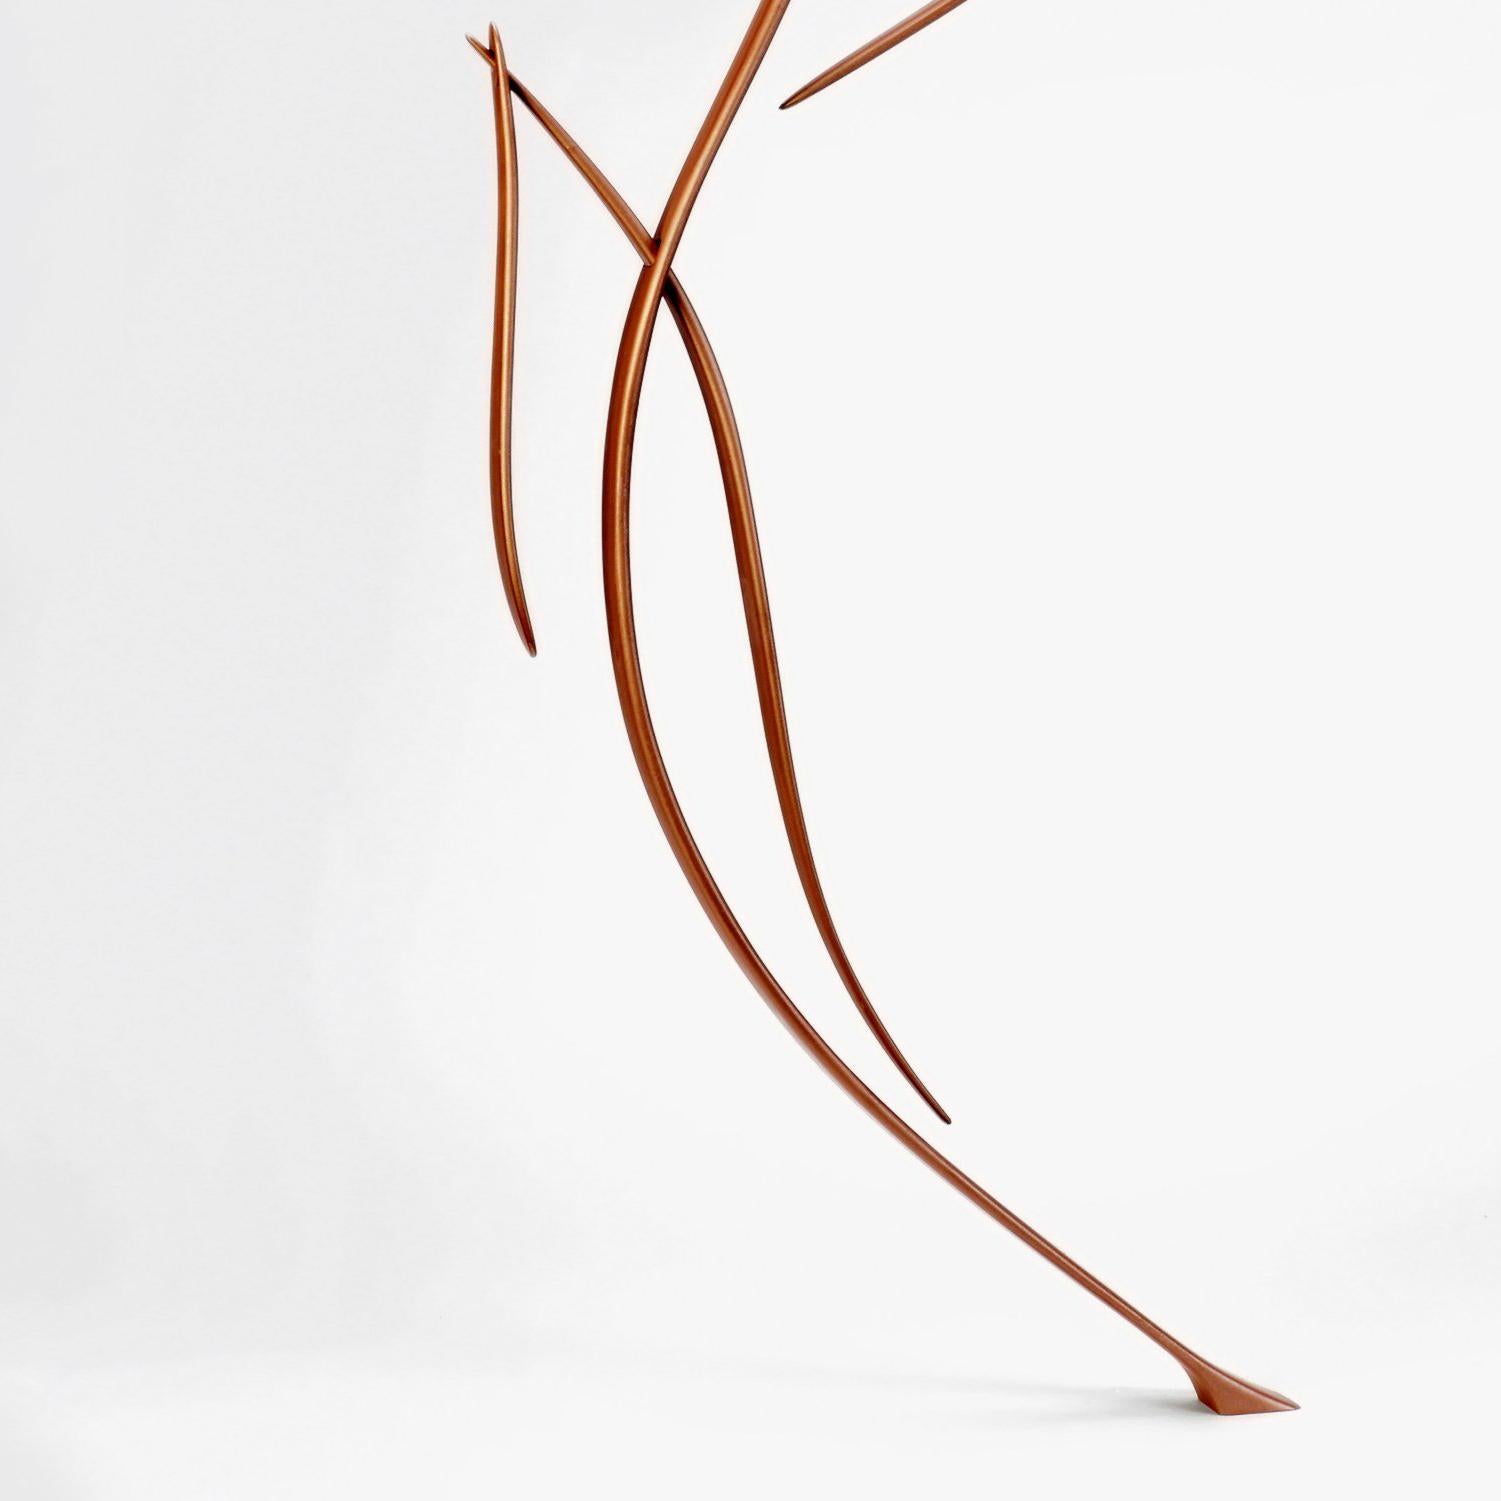 Ten Pieces Reaching Up and Over - Brown Abstract Sculpture by Will Clift